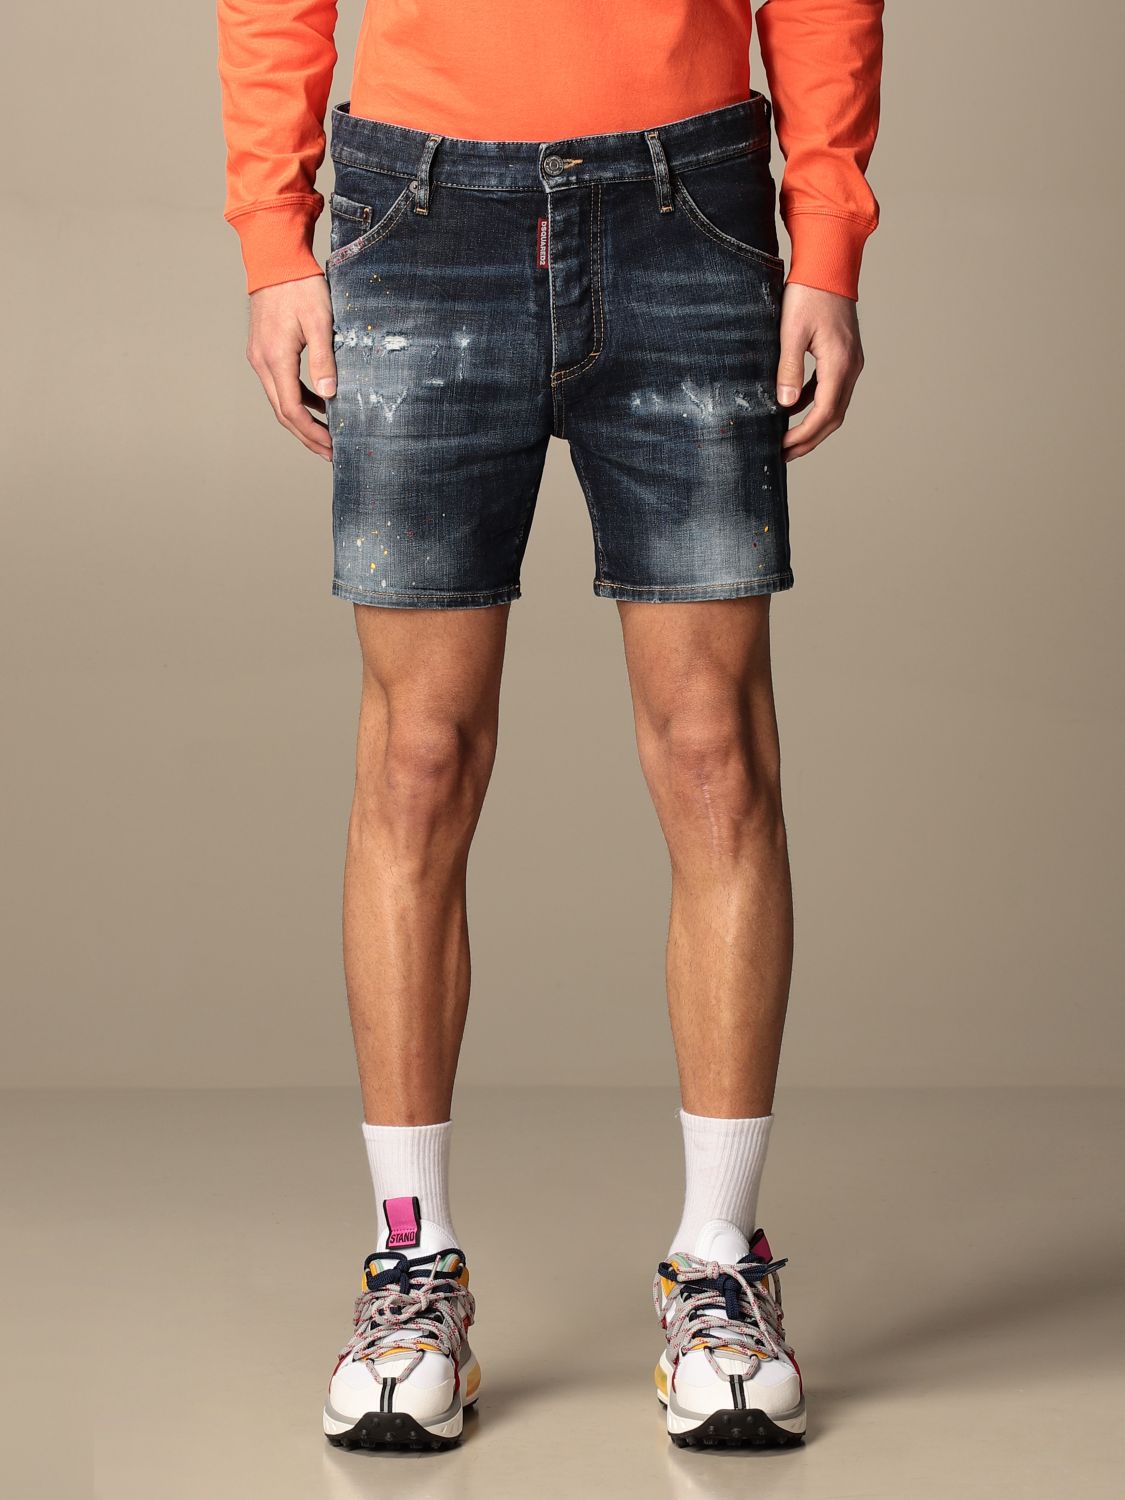 Dsquared2 denim shorts in used denim with tears